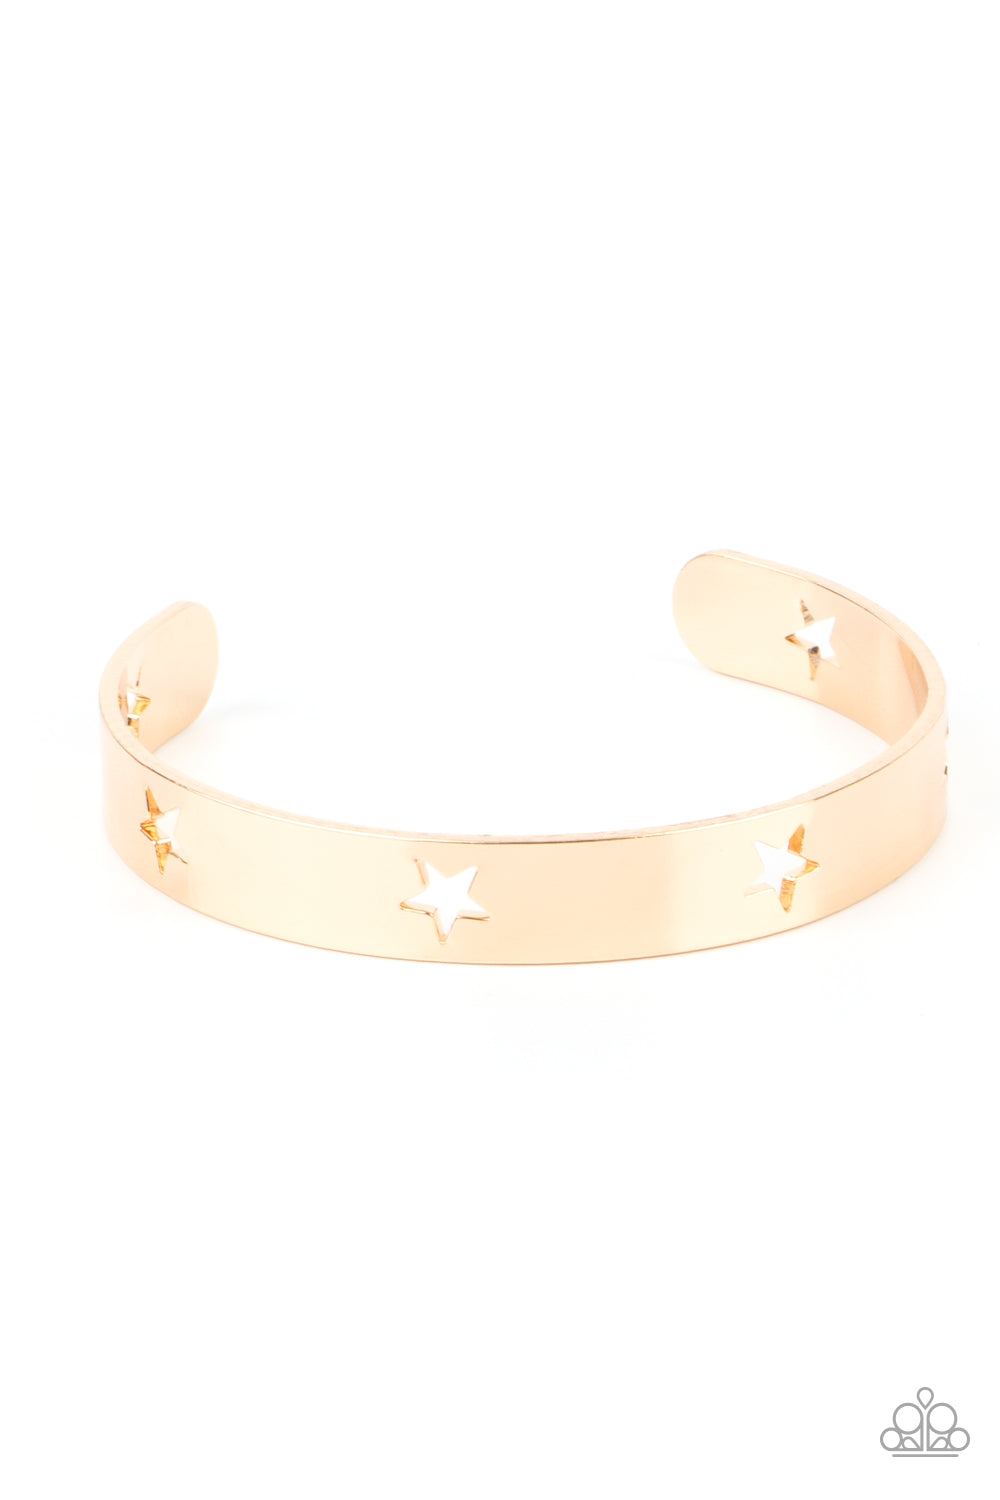 American Girl Glamour Gold Cuff Bracelet - Paparazzi Accessories  Airy gold stars are cutout along a classic gold cuff, creating a stellar centerpiece around the wrist.  Sold as one individual bracelet.